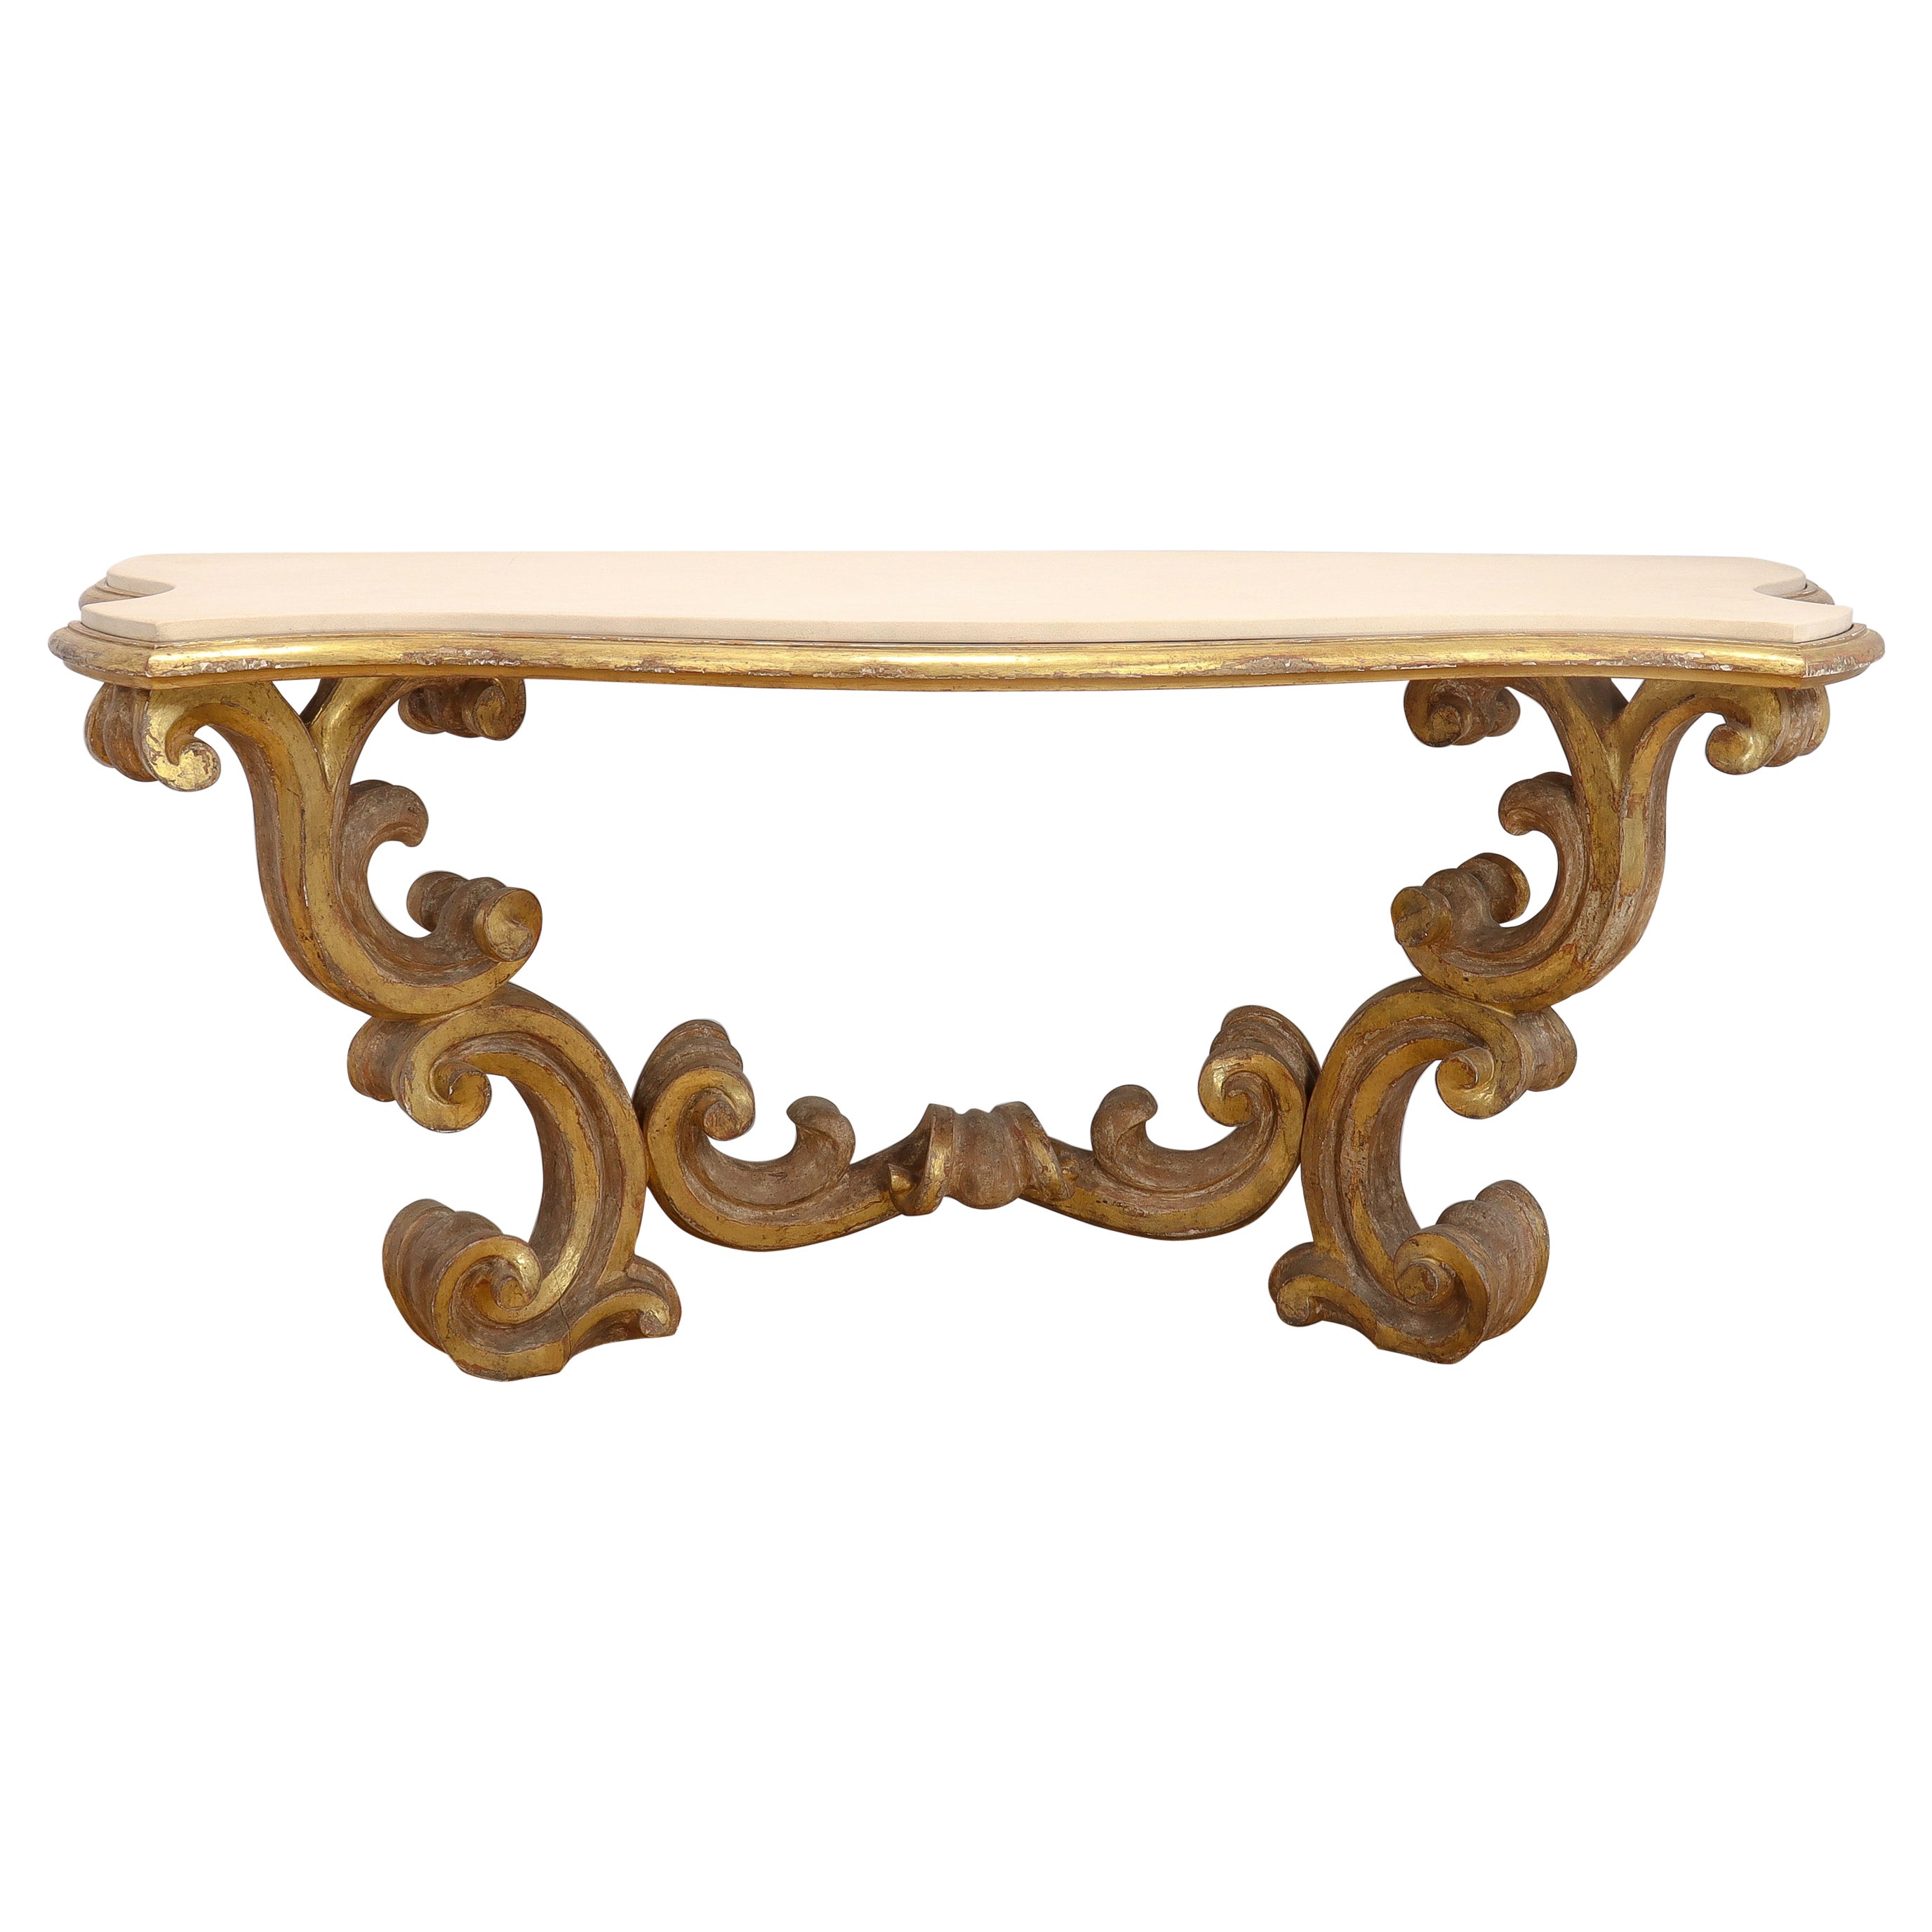 Gessoed & Gilt Rococo / Louis XV Style Demilune Console Table with Limestone